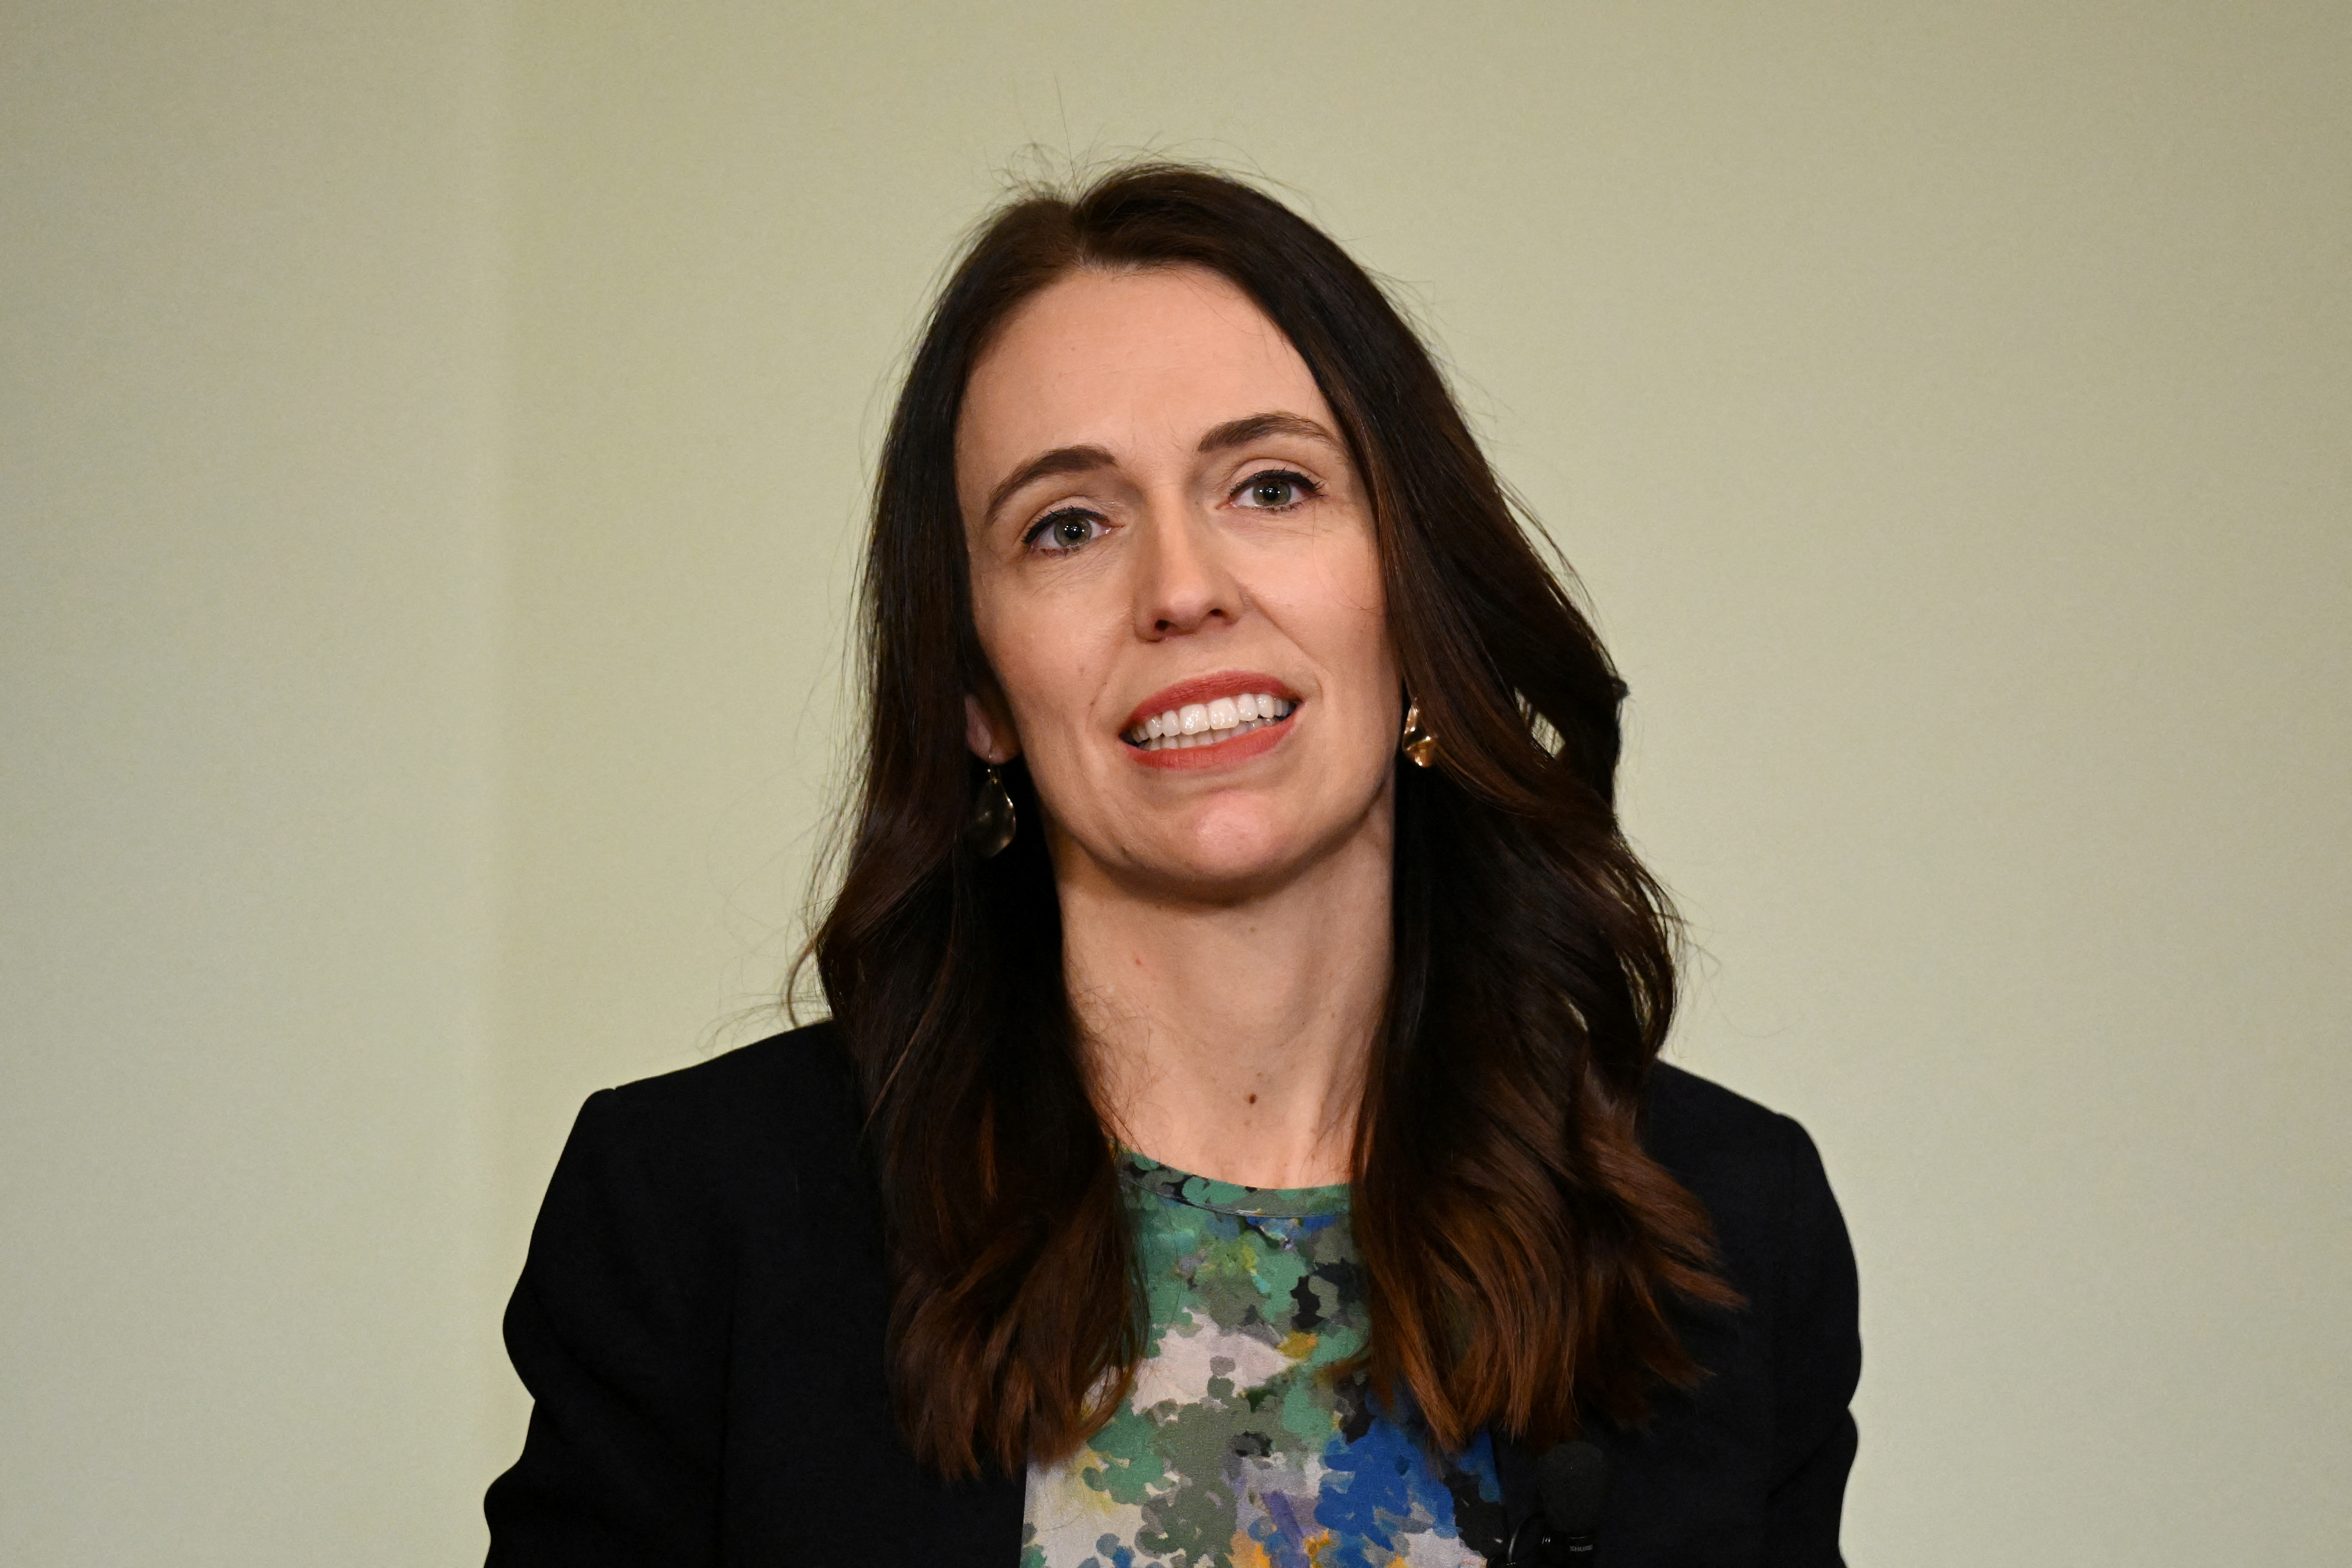 New Zealand's Prime Minister Jacinda Ardern addresses the Lowy Institute in Sydney